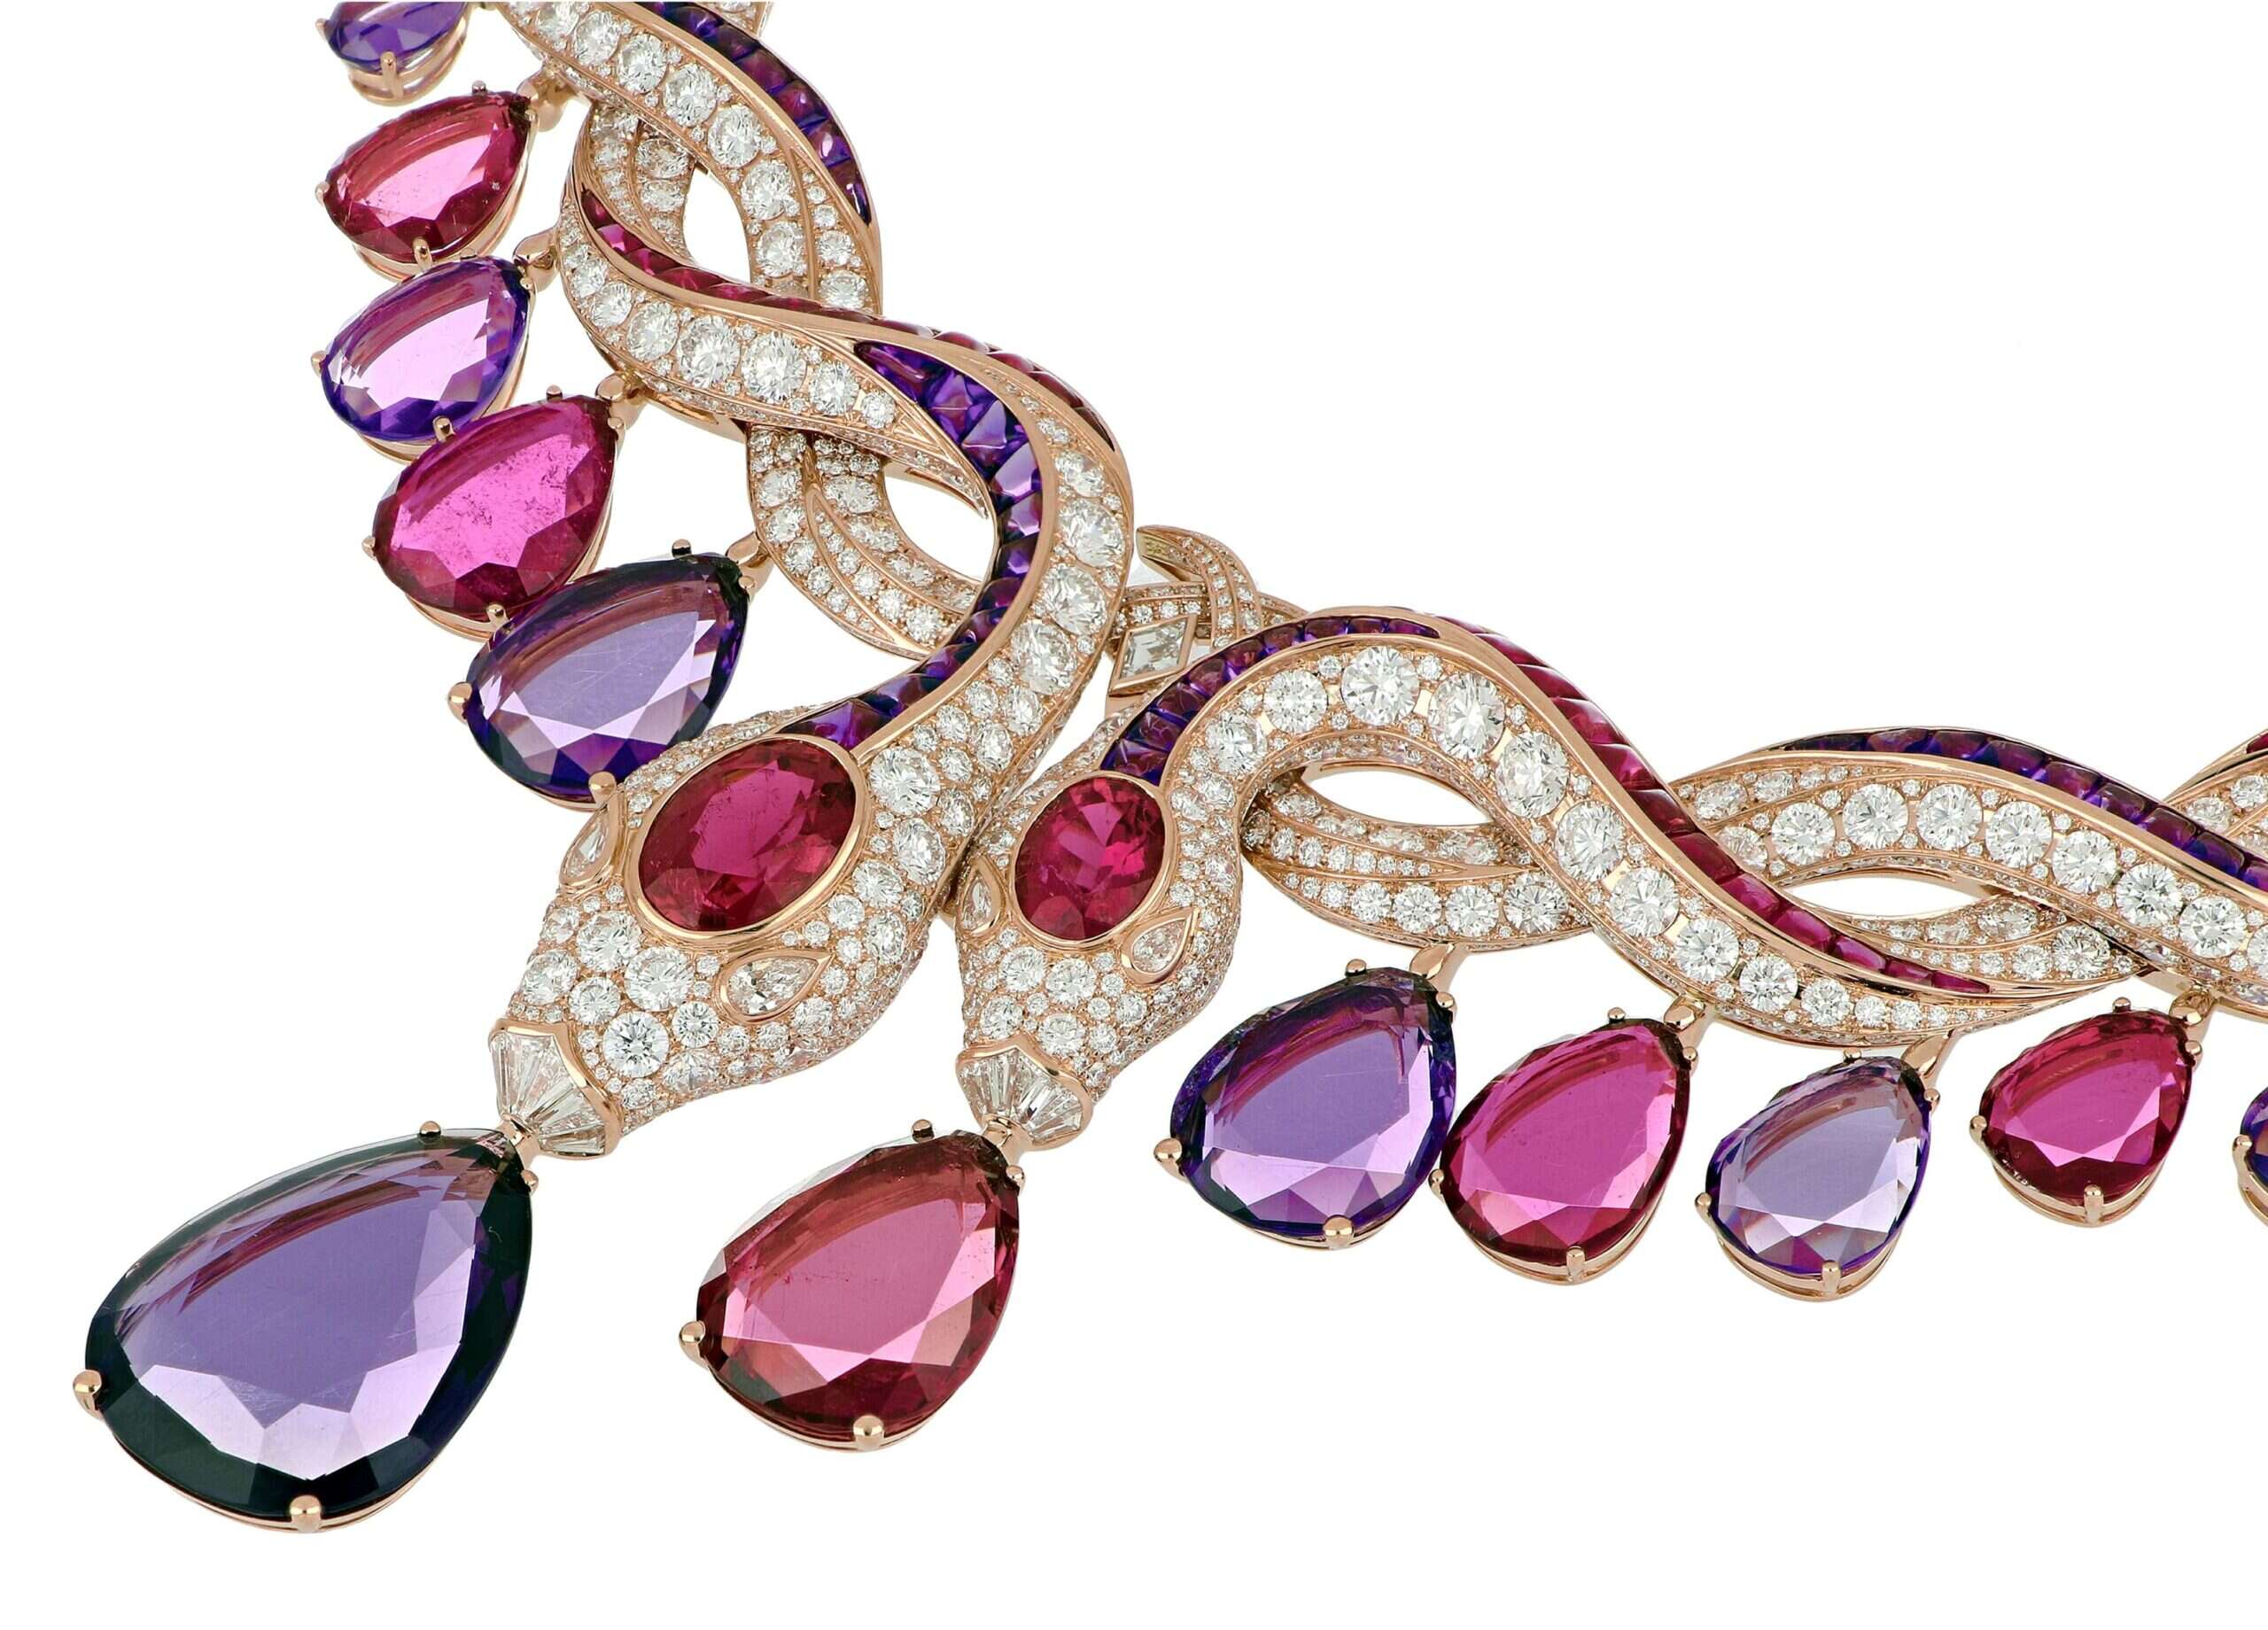 Chopard's New High Jewelry Collection Celebrates 75 Years of